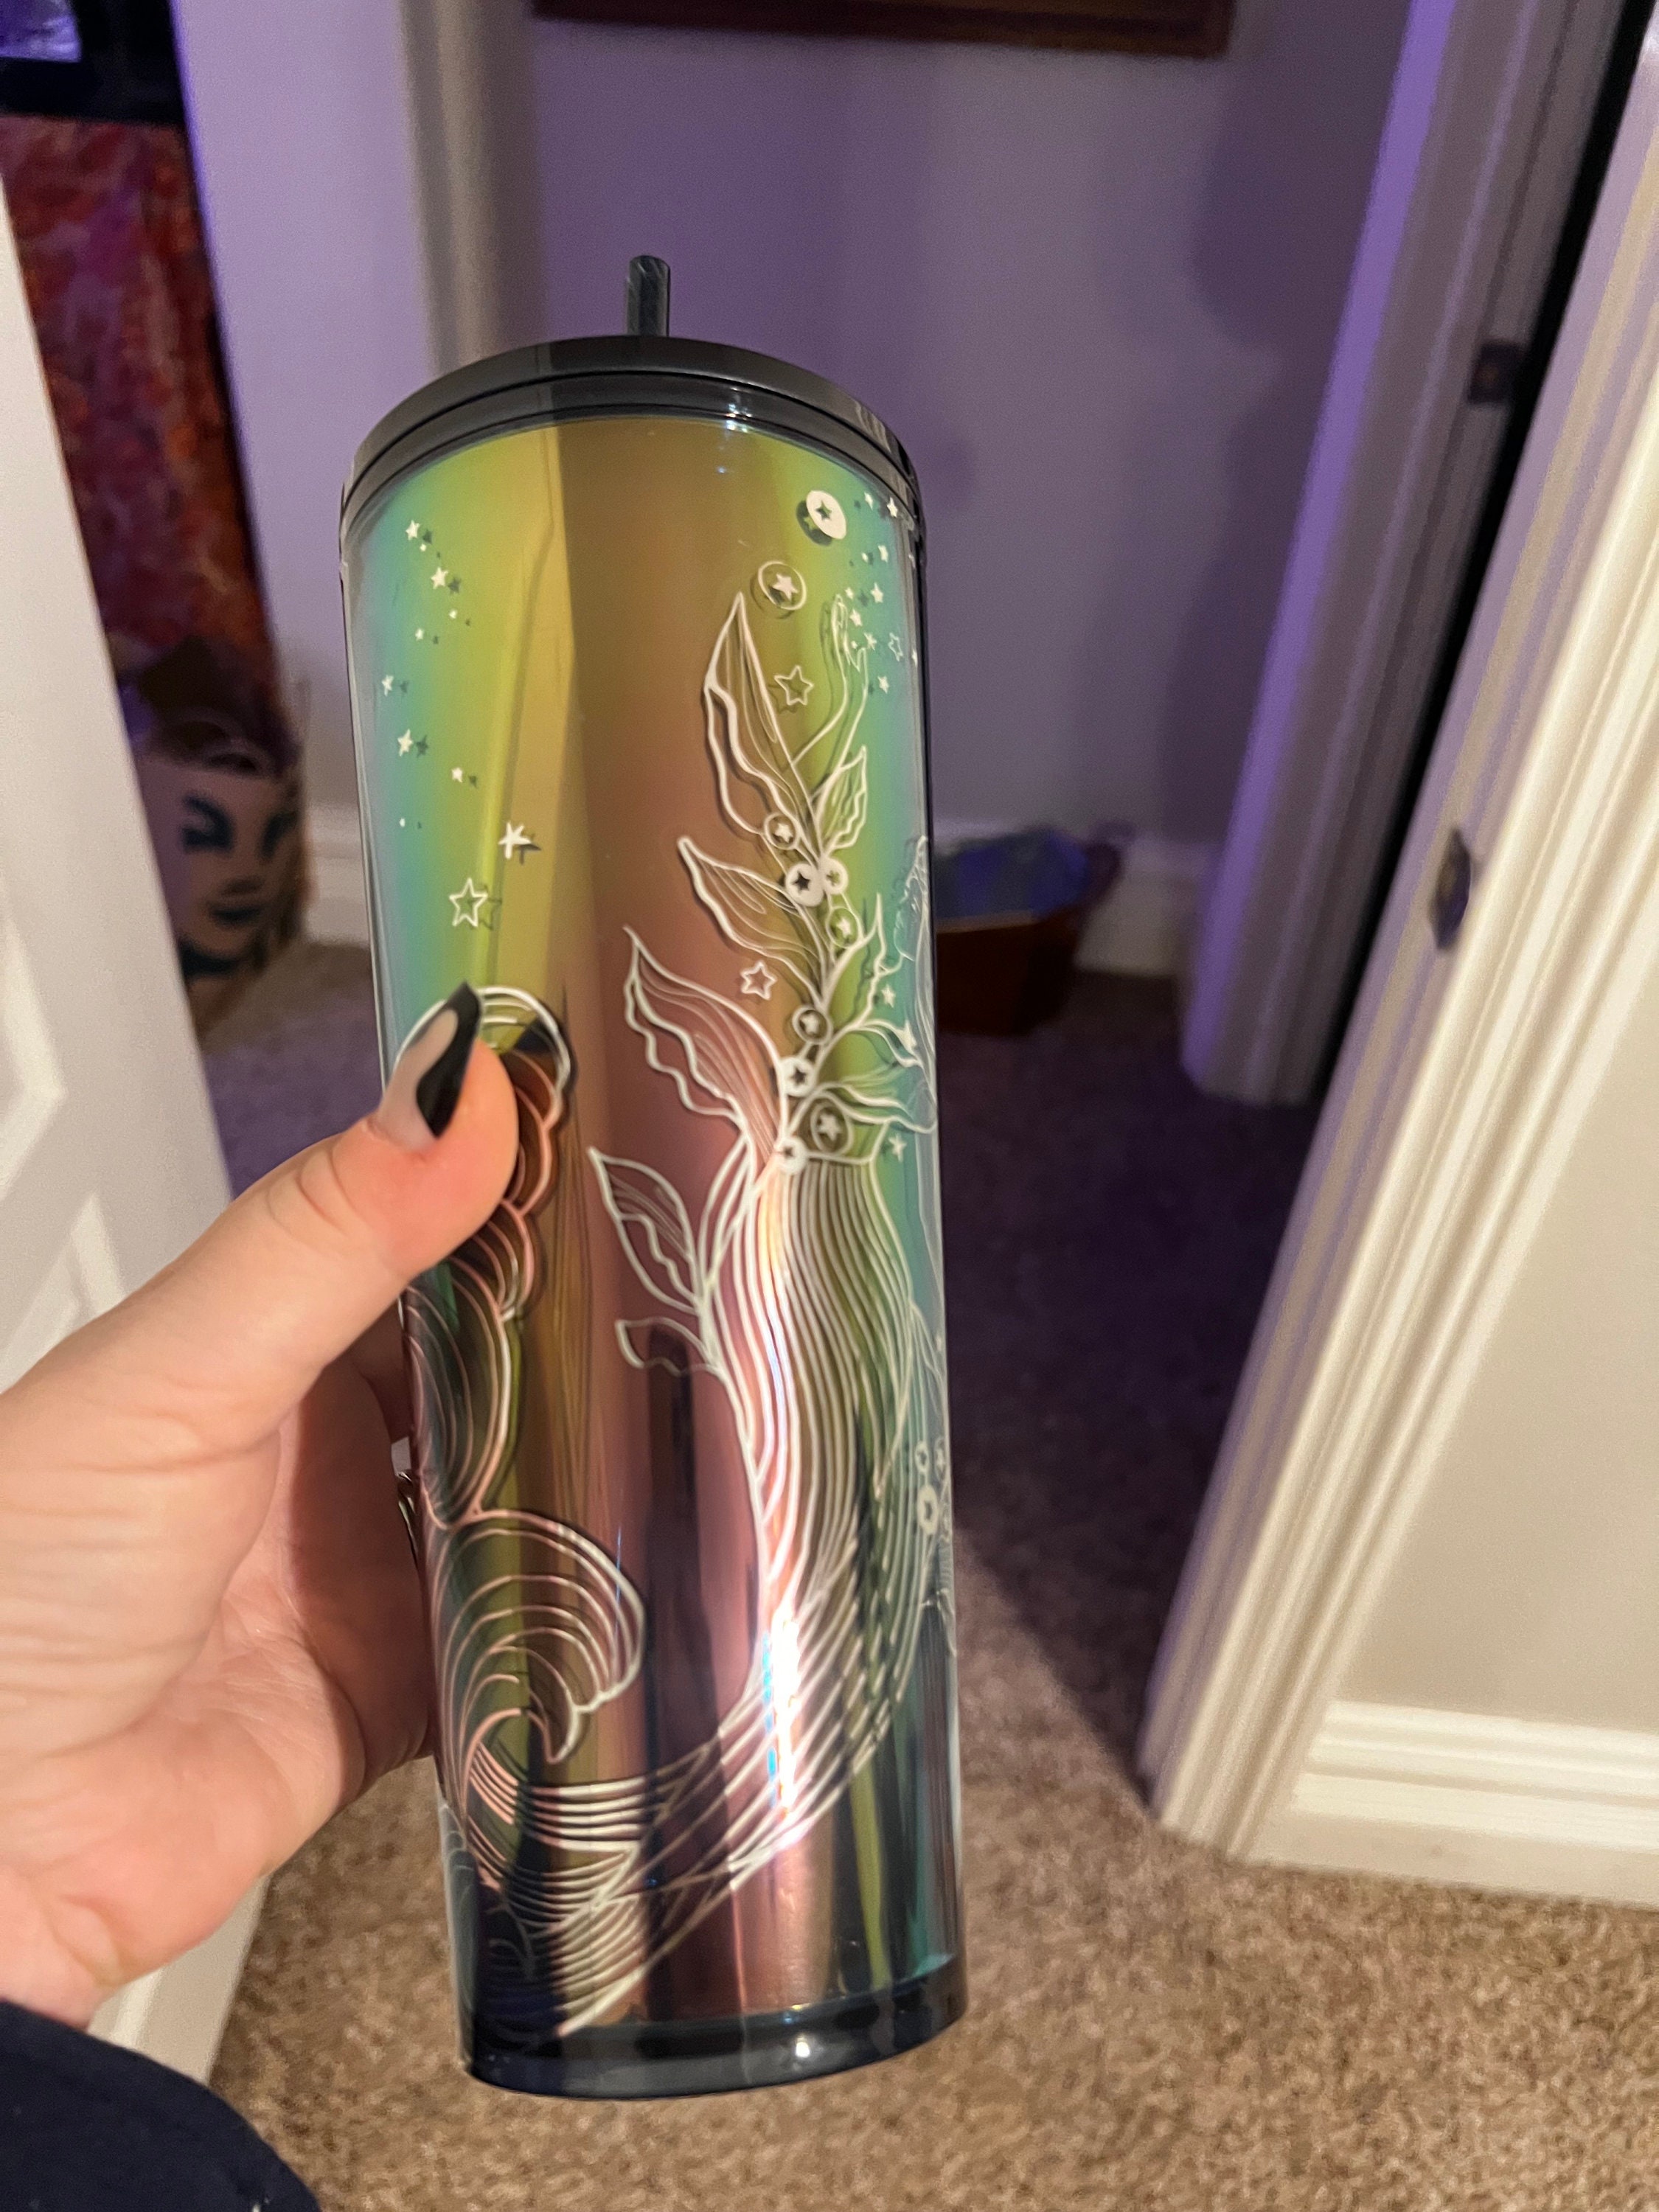 NWT Starbucks Copper Rose Gold Soft Touch Siren Venti Tumbler Cold Cup 24  Oz SKU 011129782 Easter 